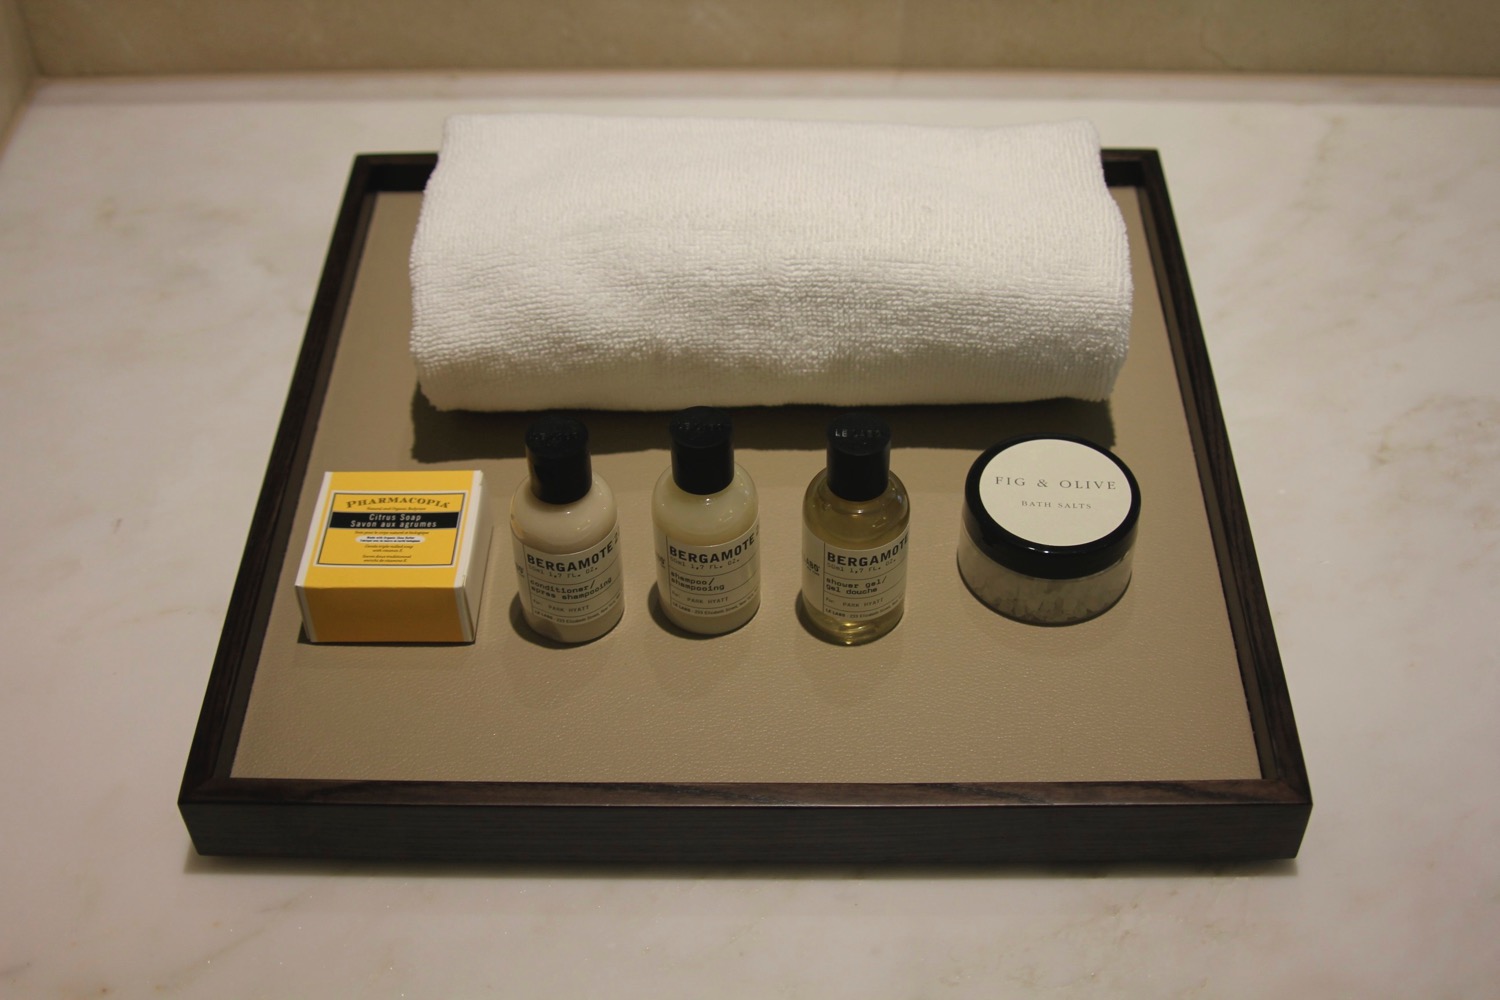 a group of small bottles and a towel on a tray